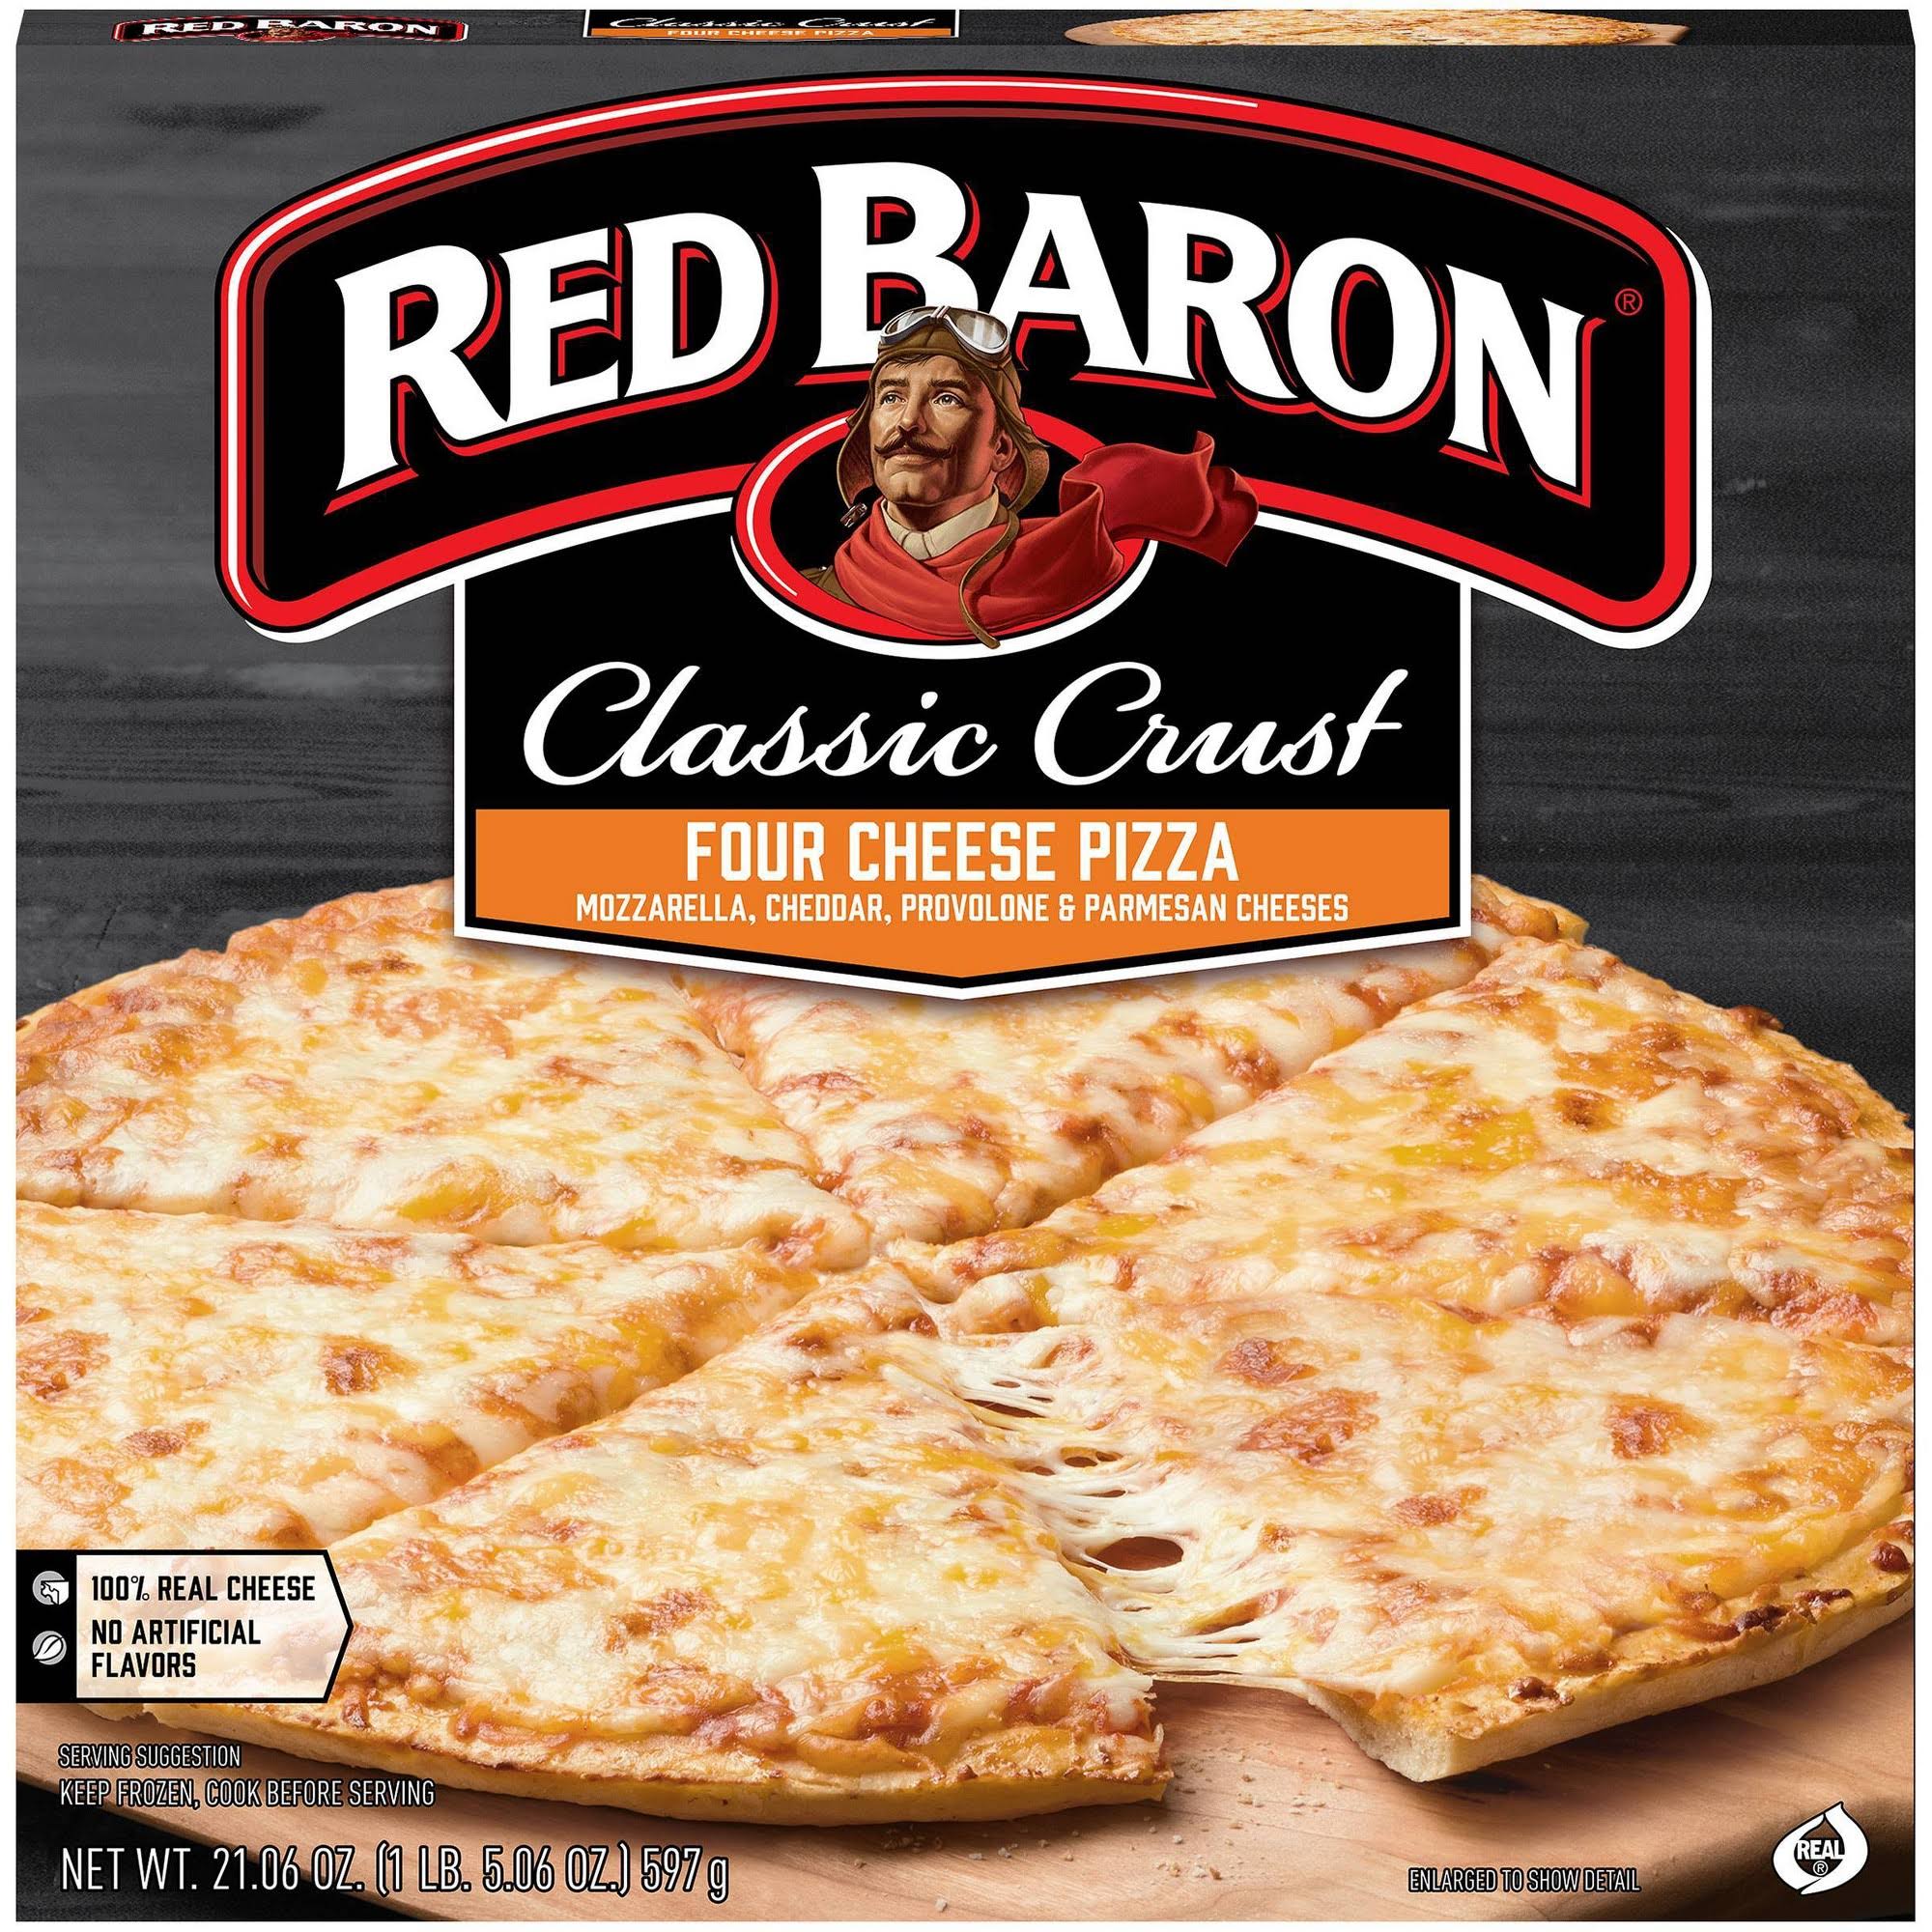 Red Baron Classic Crust Pizza - 4 Cheese, 21.06oz